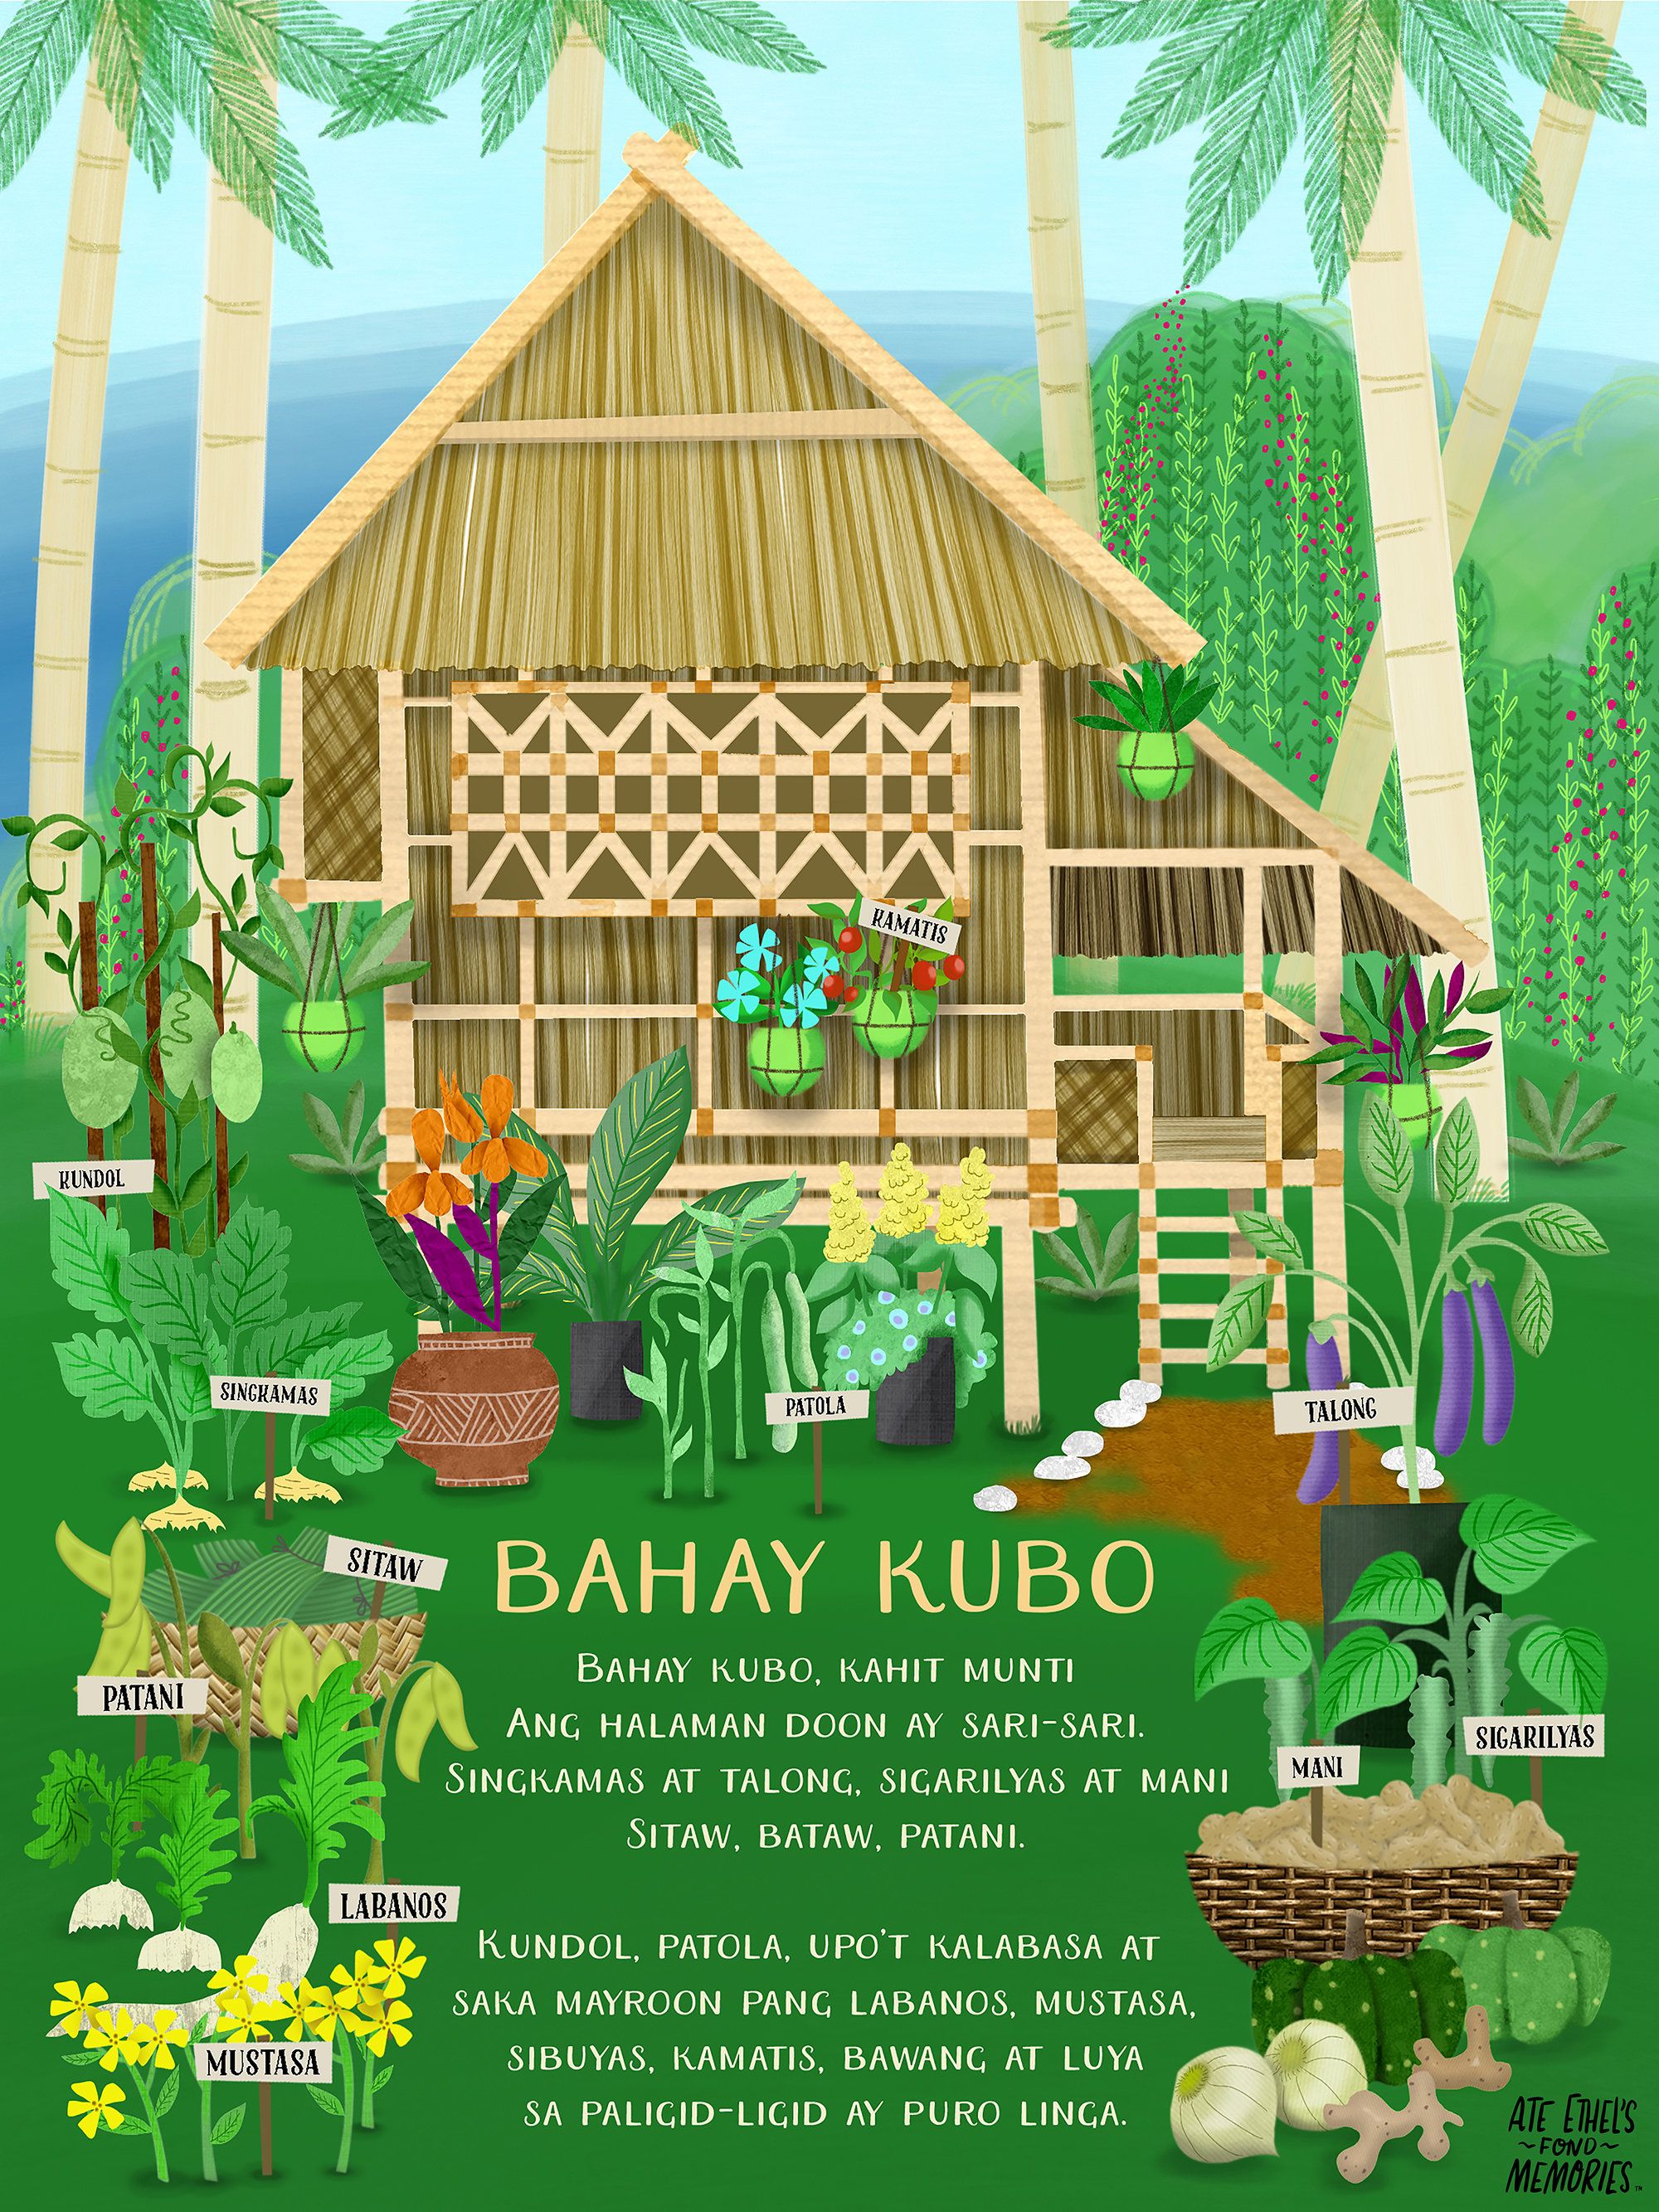 How Many Vegetables In Bahay Kubo